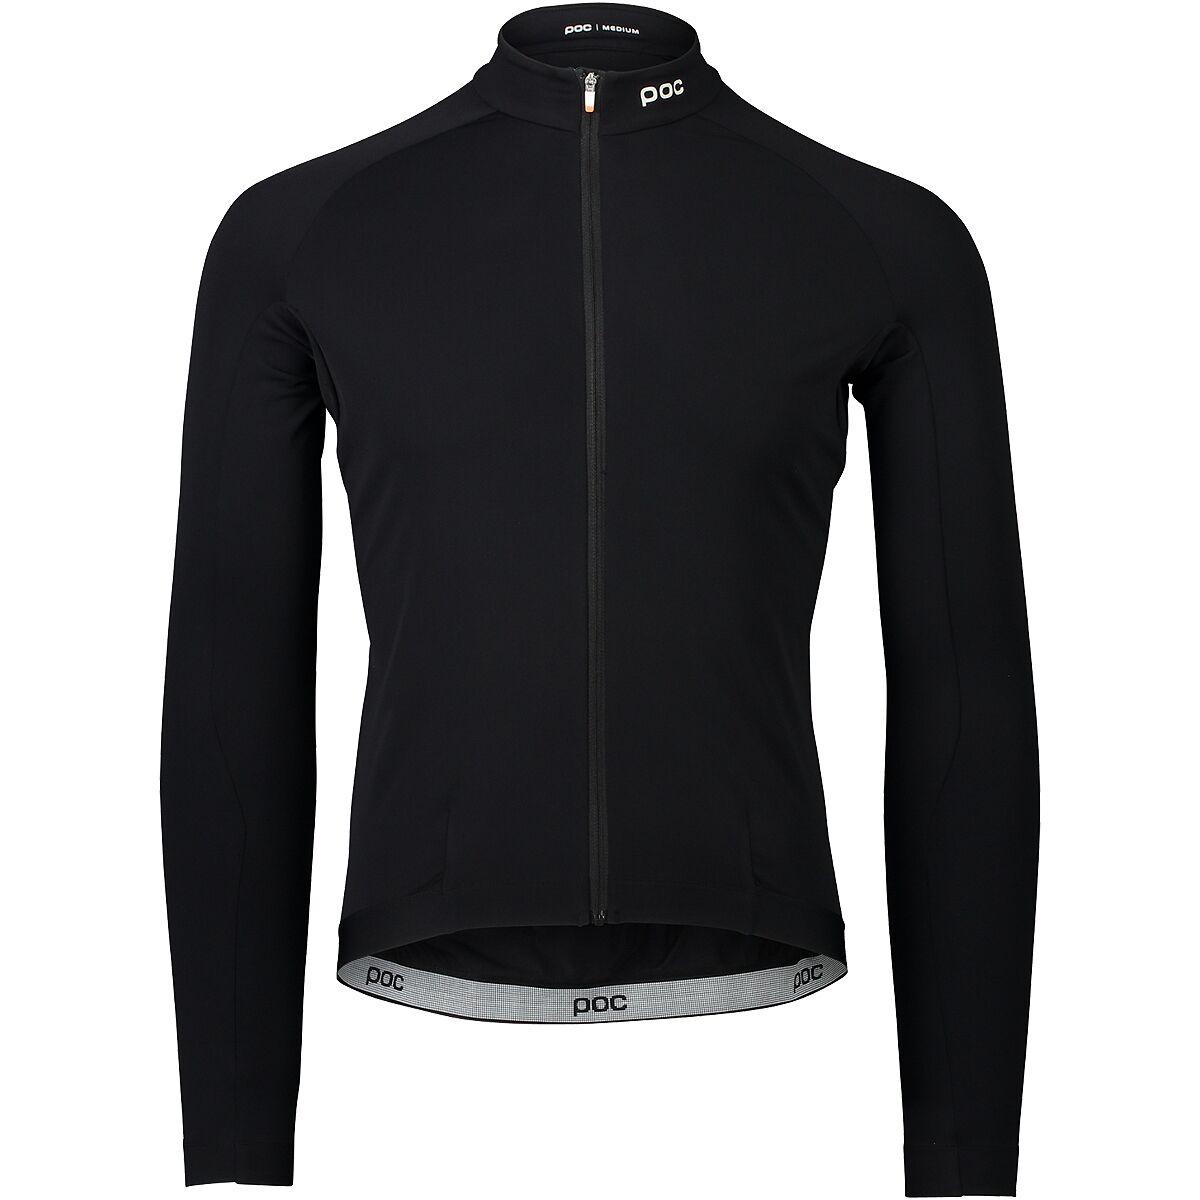 POC Ambient Thermal Jersey - Men's